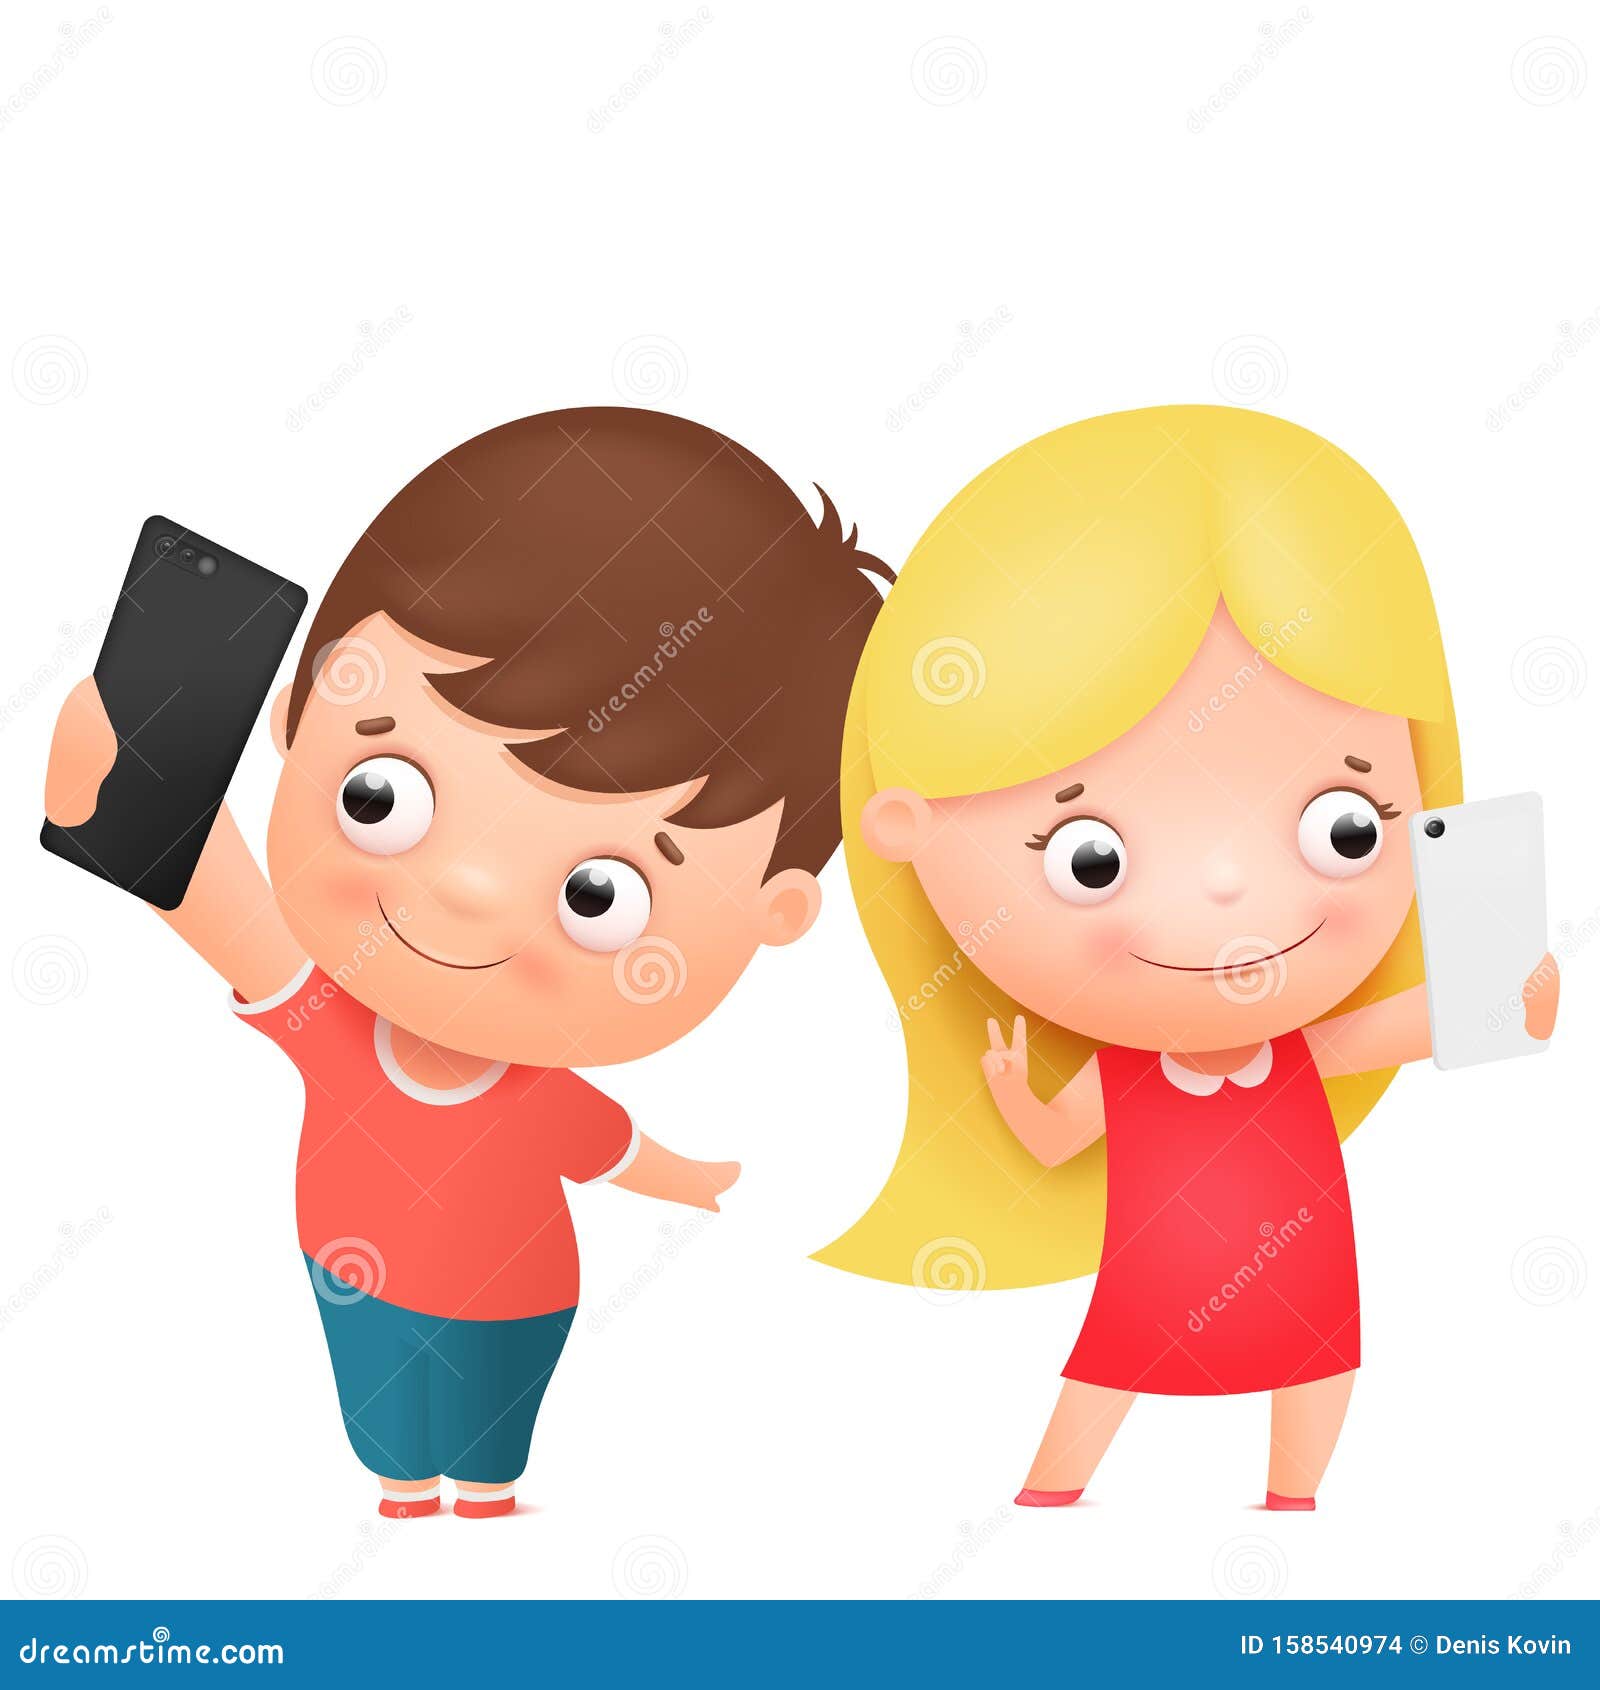 Boy and Girl Posing Together and Making Selfie. Funny Cartoon Children  Character Stock Illustration - Illustration of happy, grimacing: 158540974